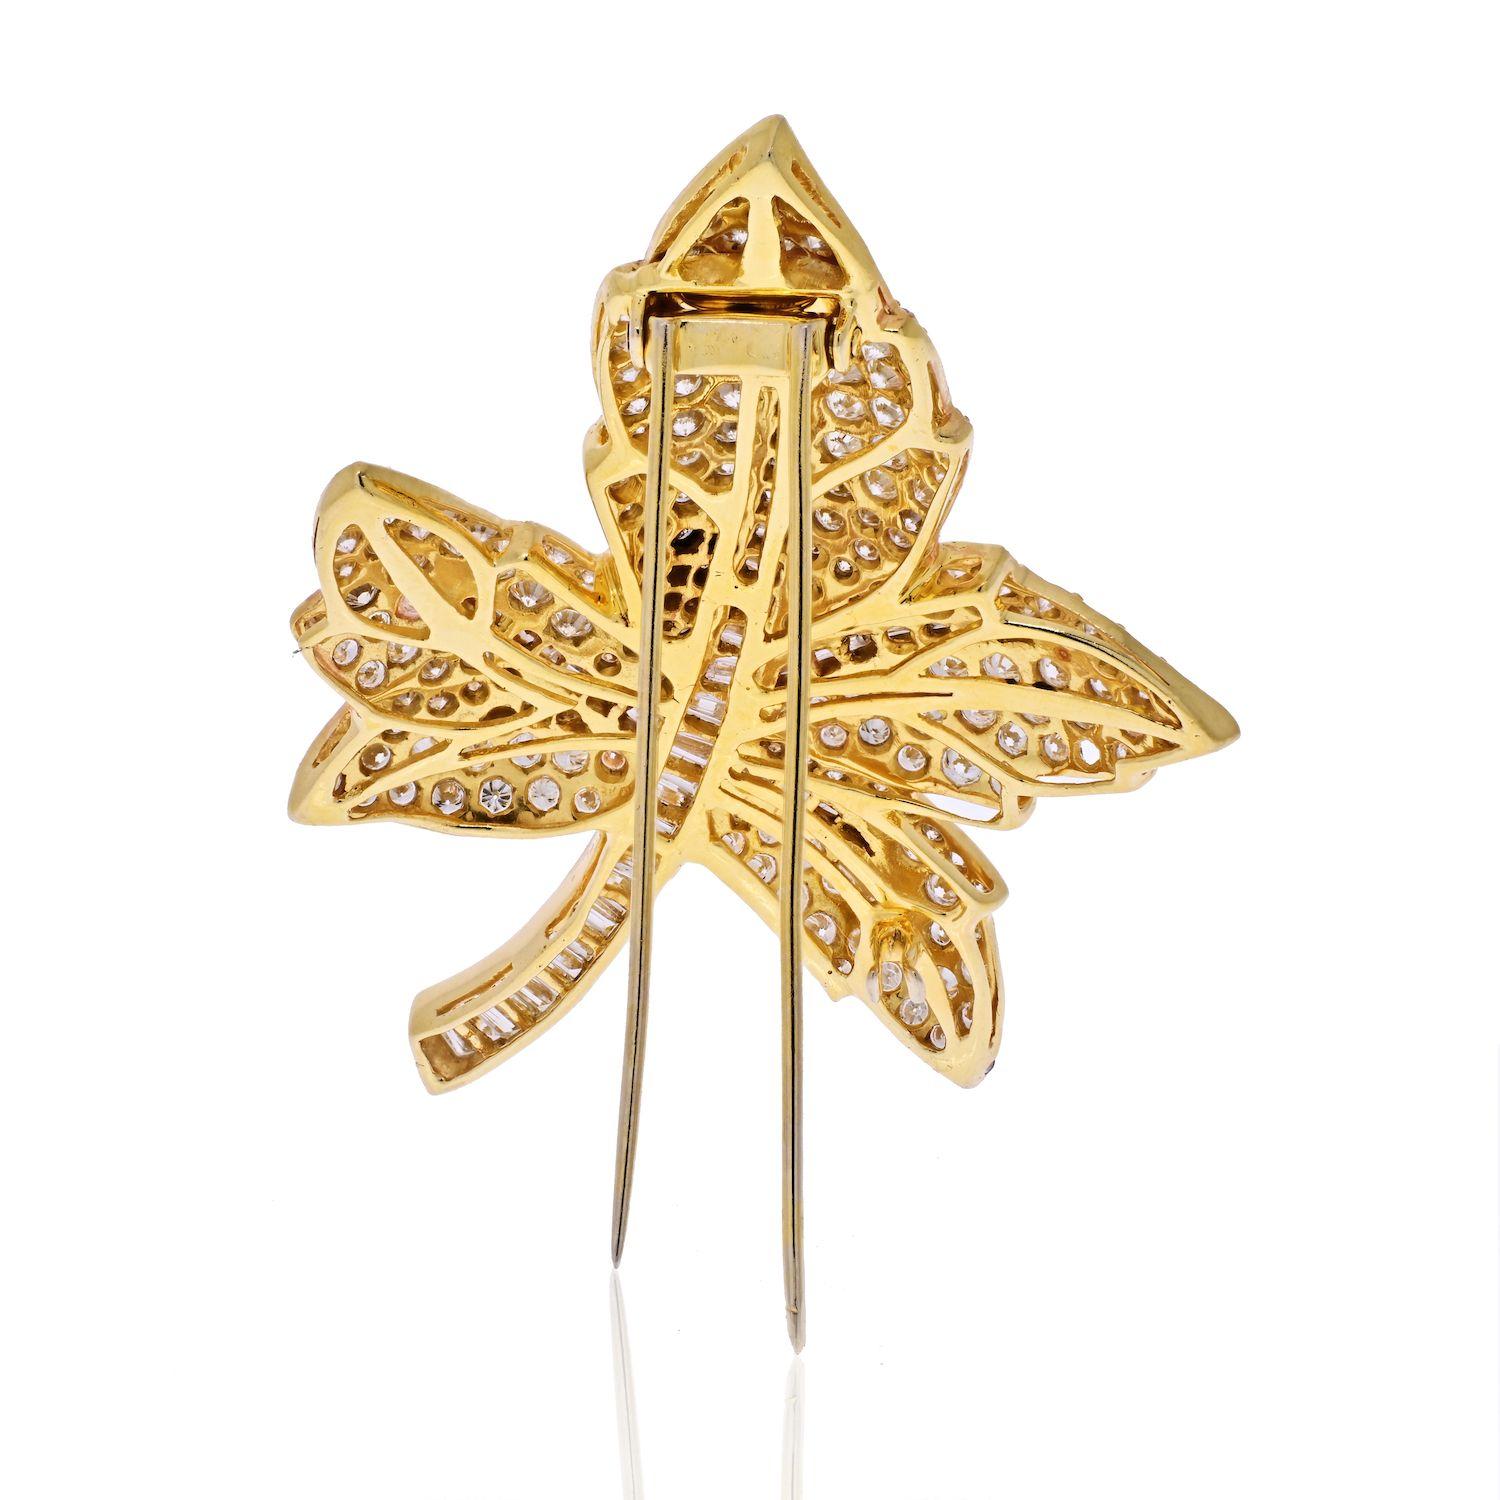 Same style as the one we often see worn by Queen Elizabeth II, maple leaf brooches are quite symbolic in English culture. This is one brooch style that the Queen loves and wears quite a lot. The brooch was passed down to her from Queen Elizabeth,